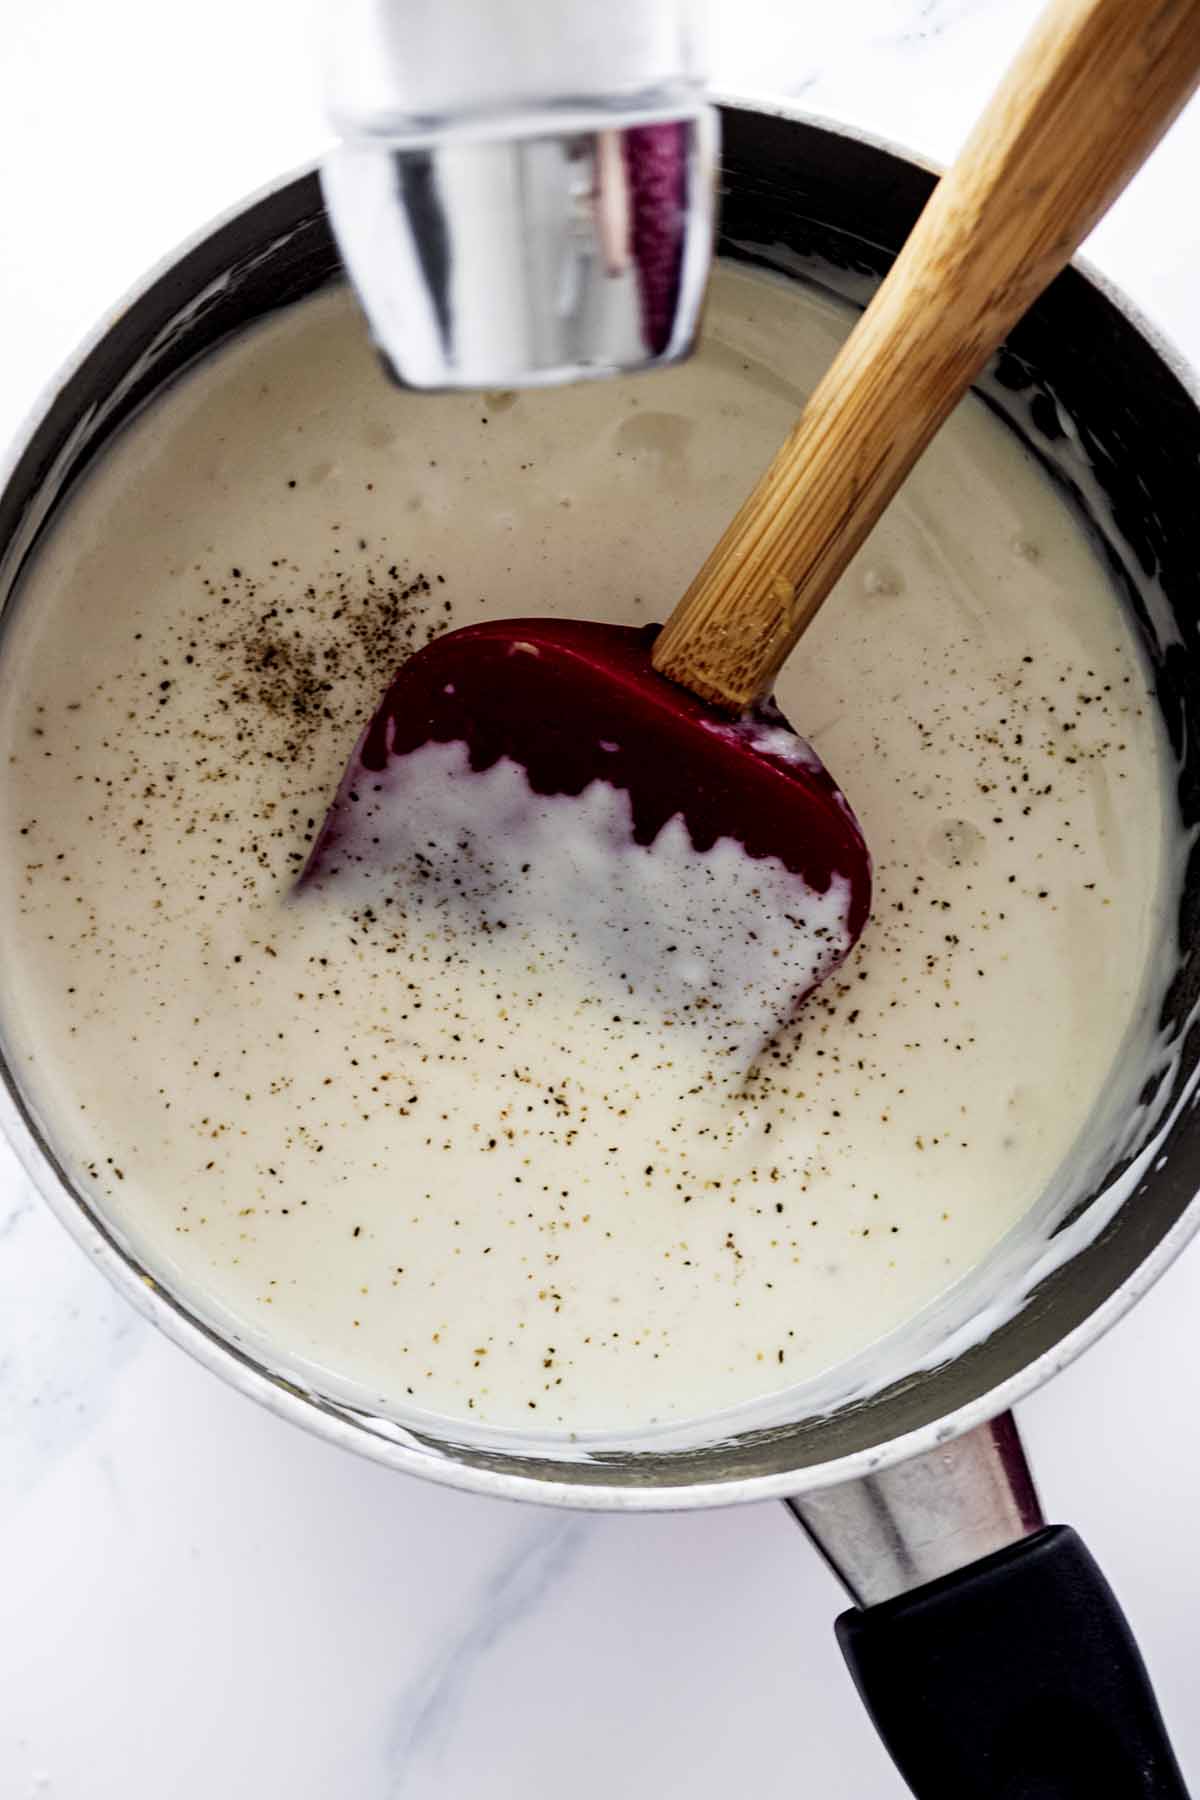 Salt being added to sauce in a saucepan with a spatula